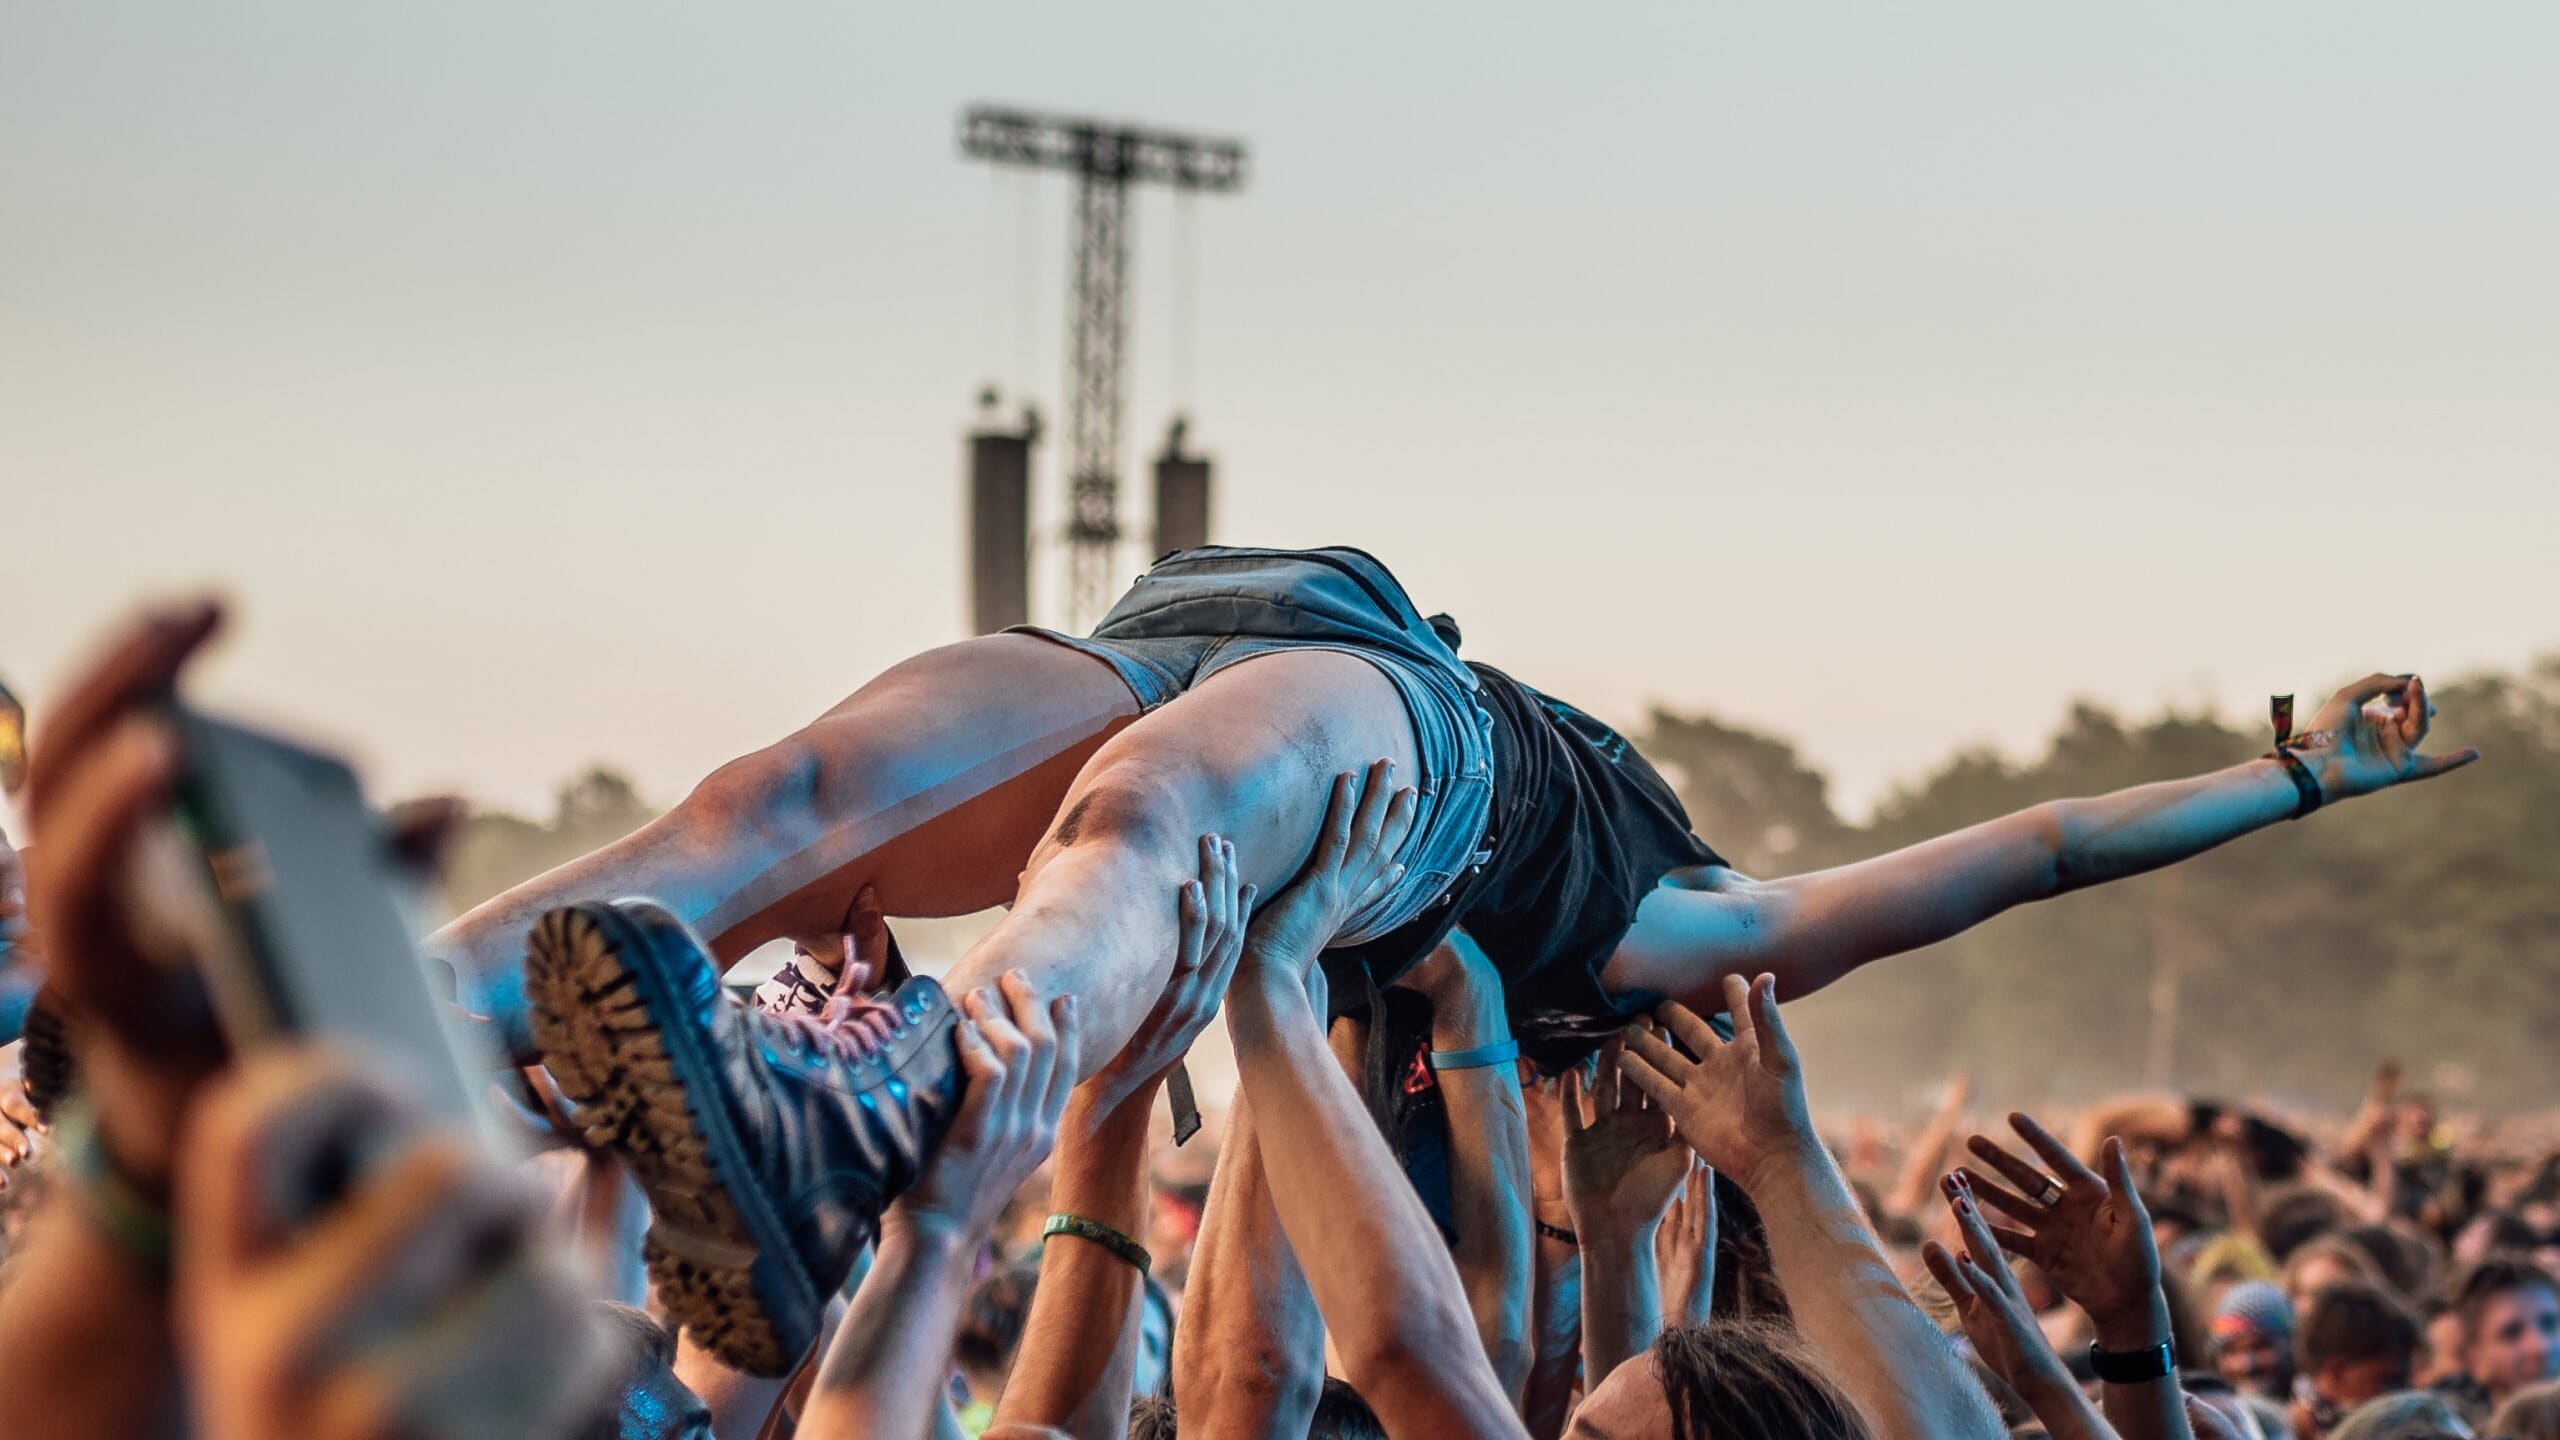 Person crowd surfing at a festival.